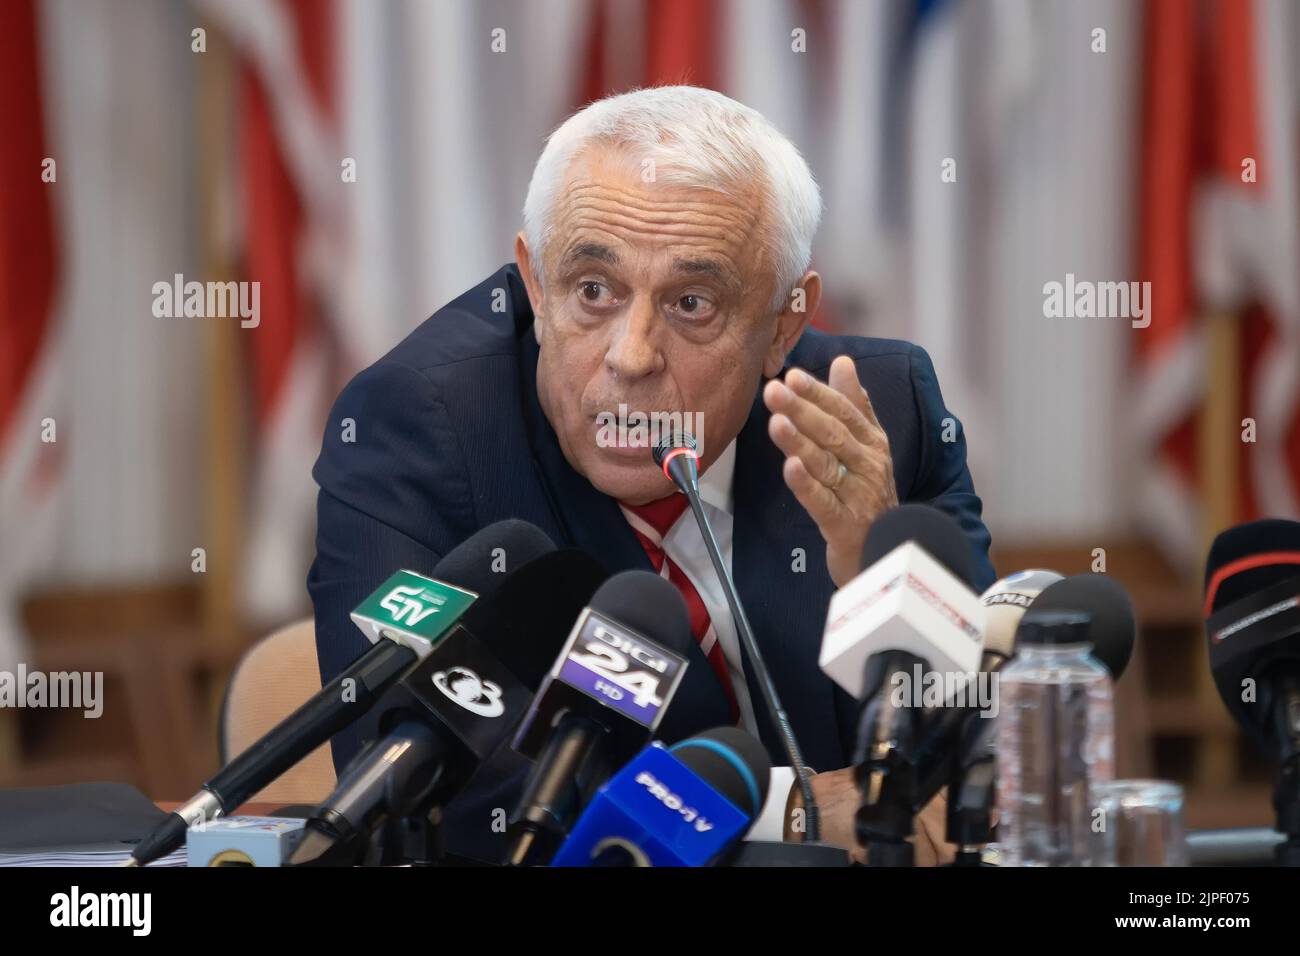 Bucharest, Romania - August 04, 2022: Petre Daea, Romanian Minister of Agriculture and Rural Development, speak in a press conference at the ministry Stock Photo